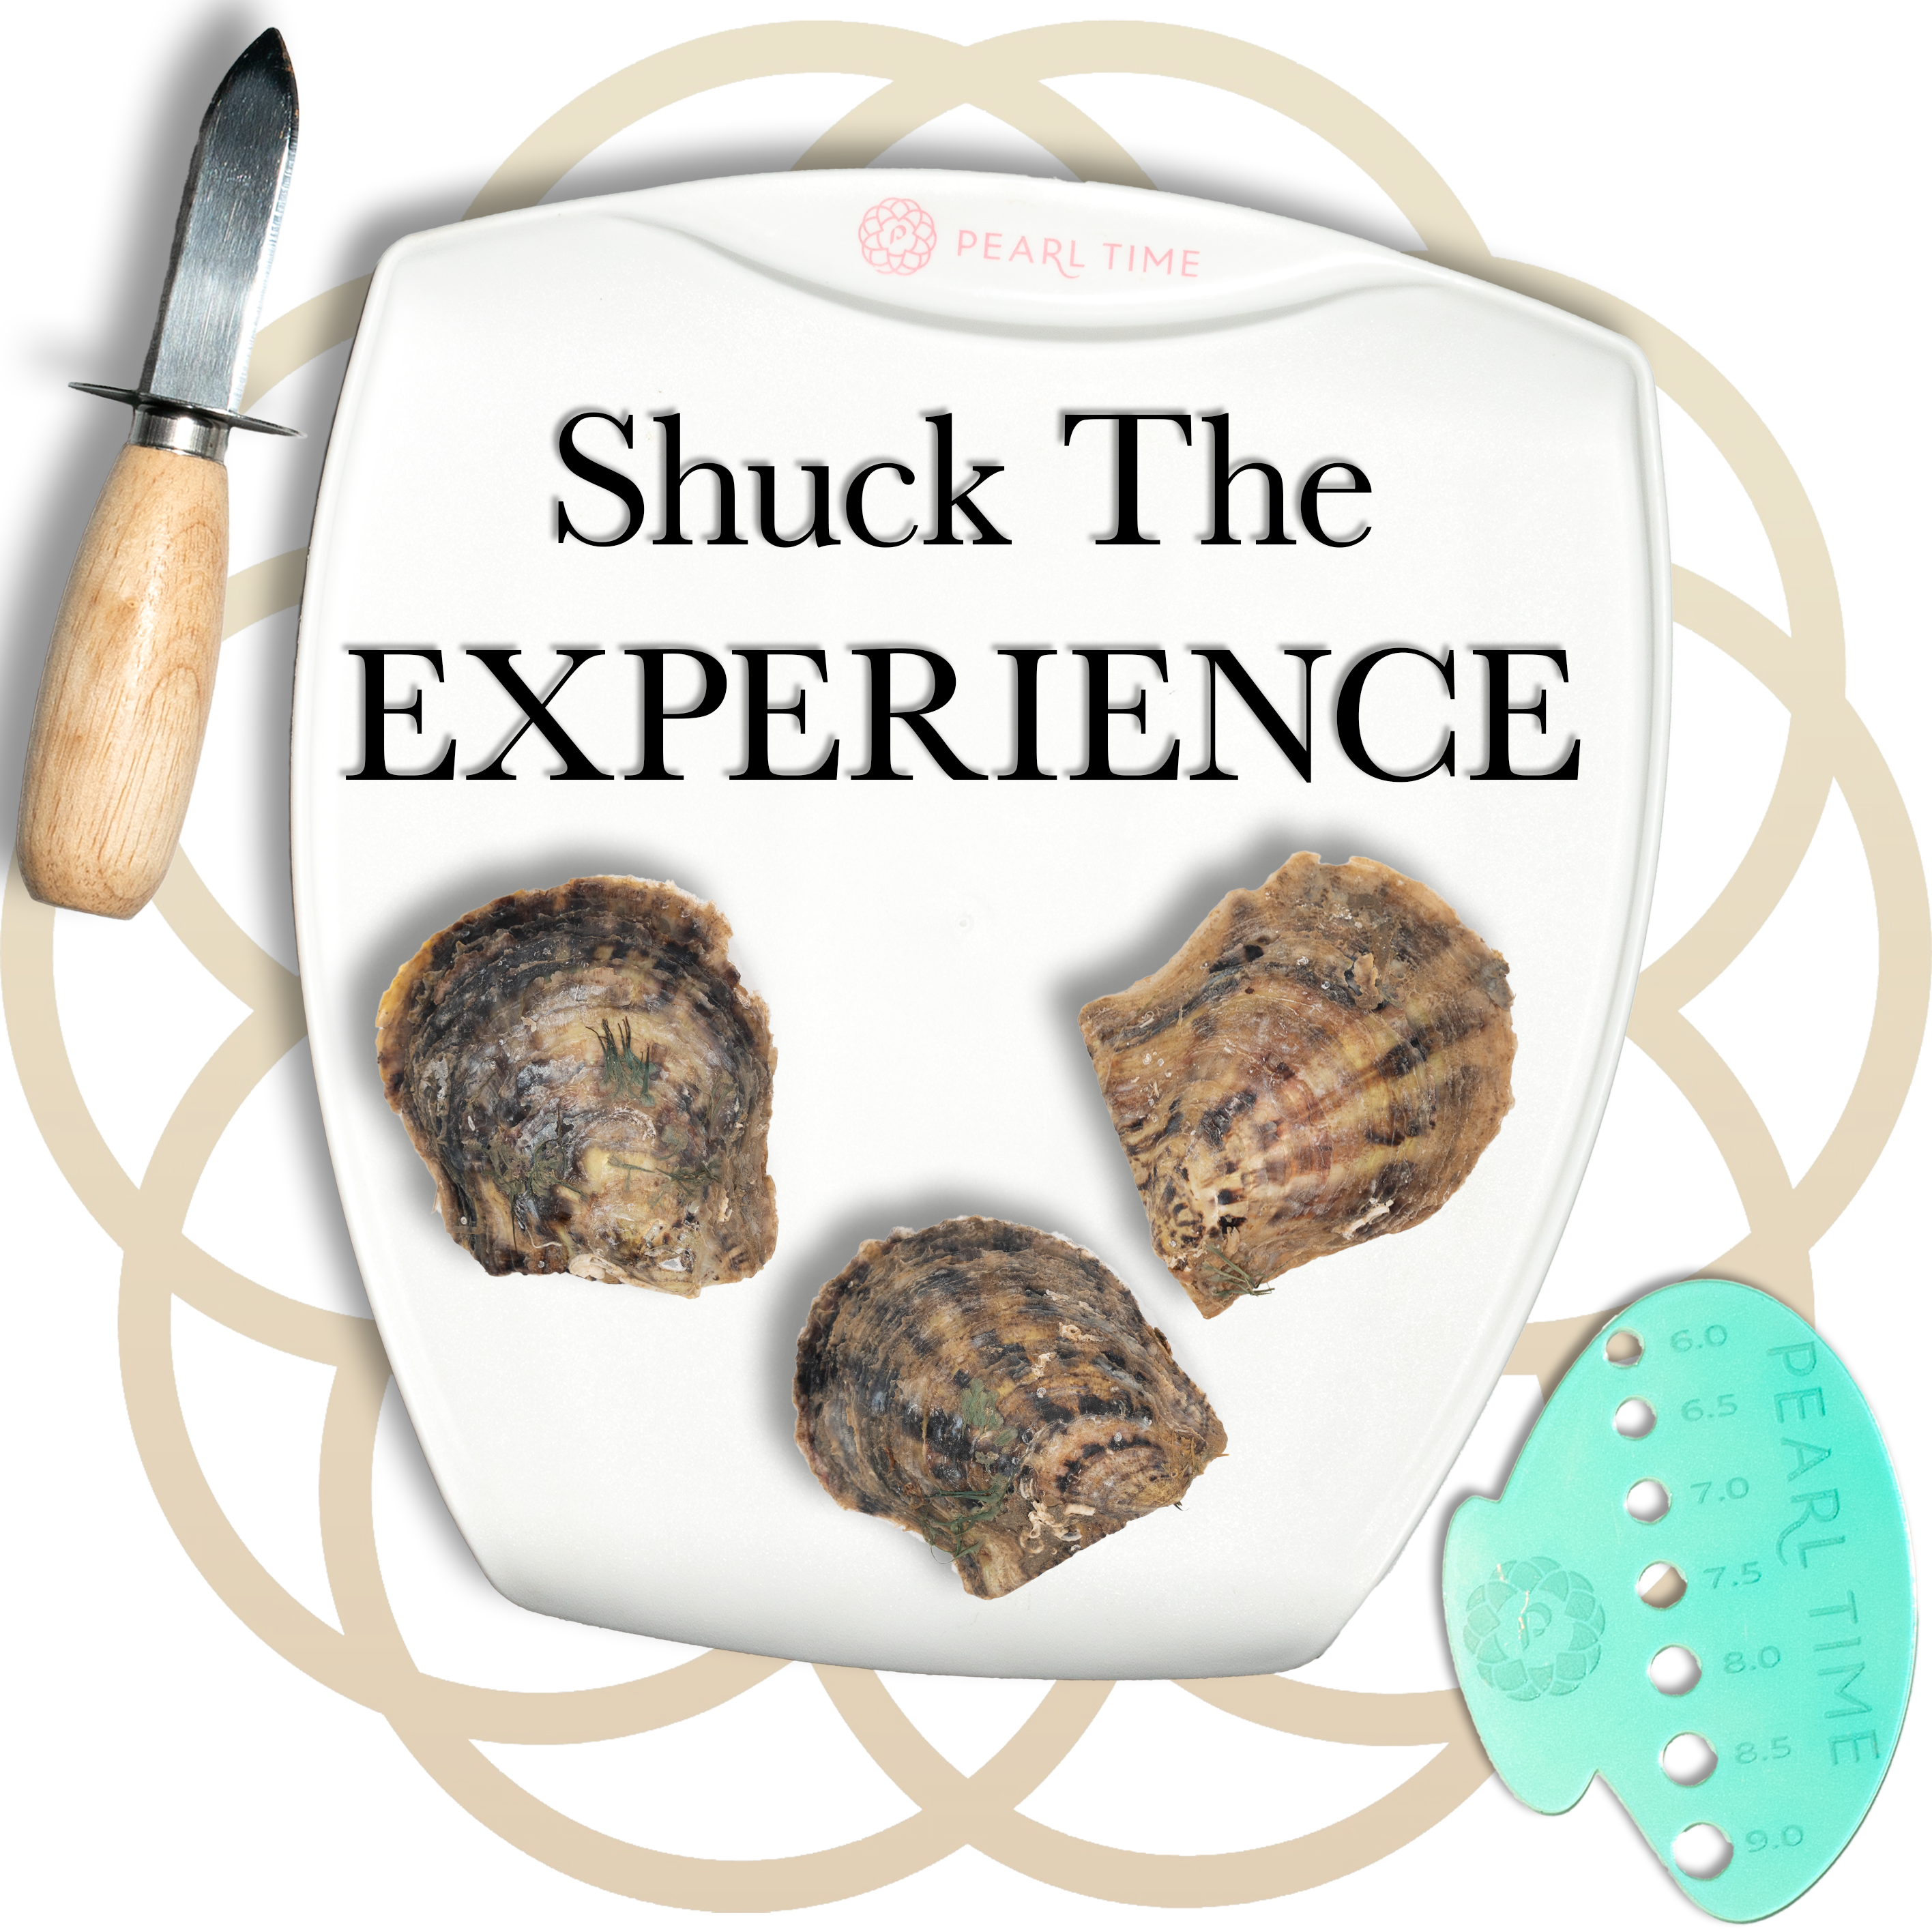 Shuck the Experience